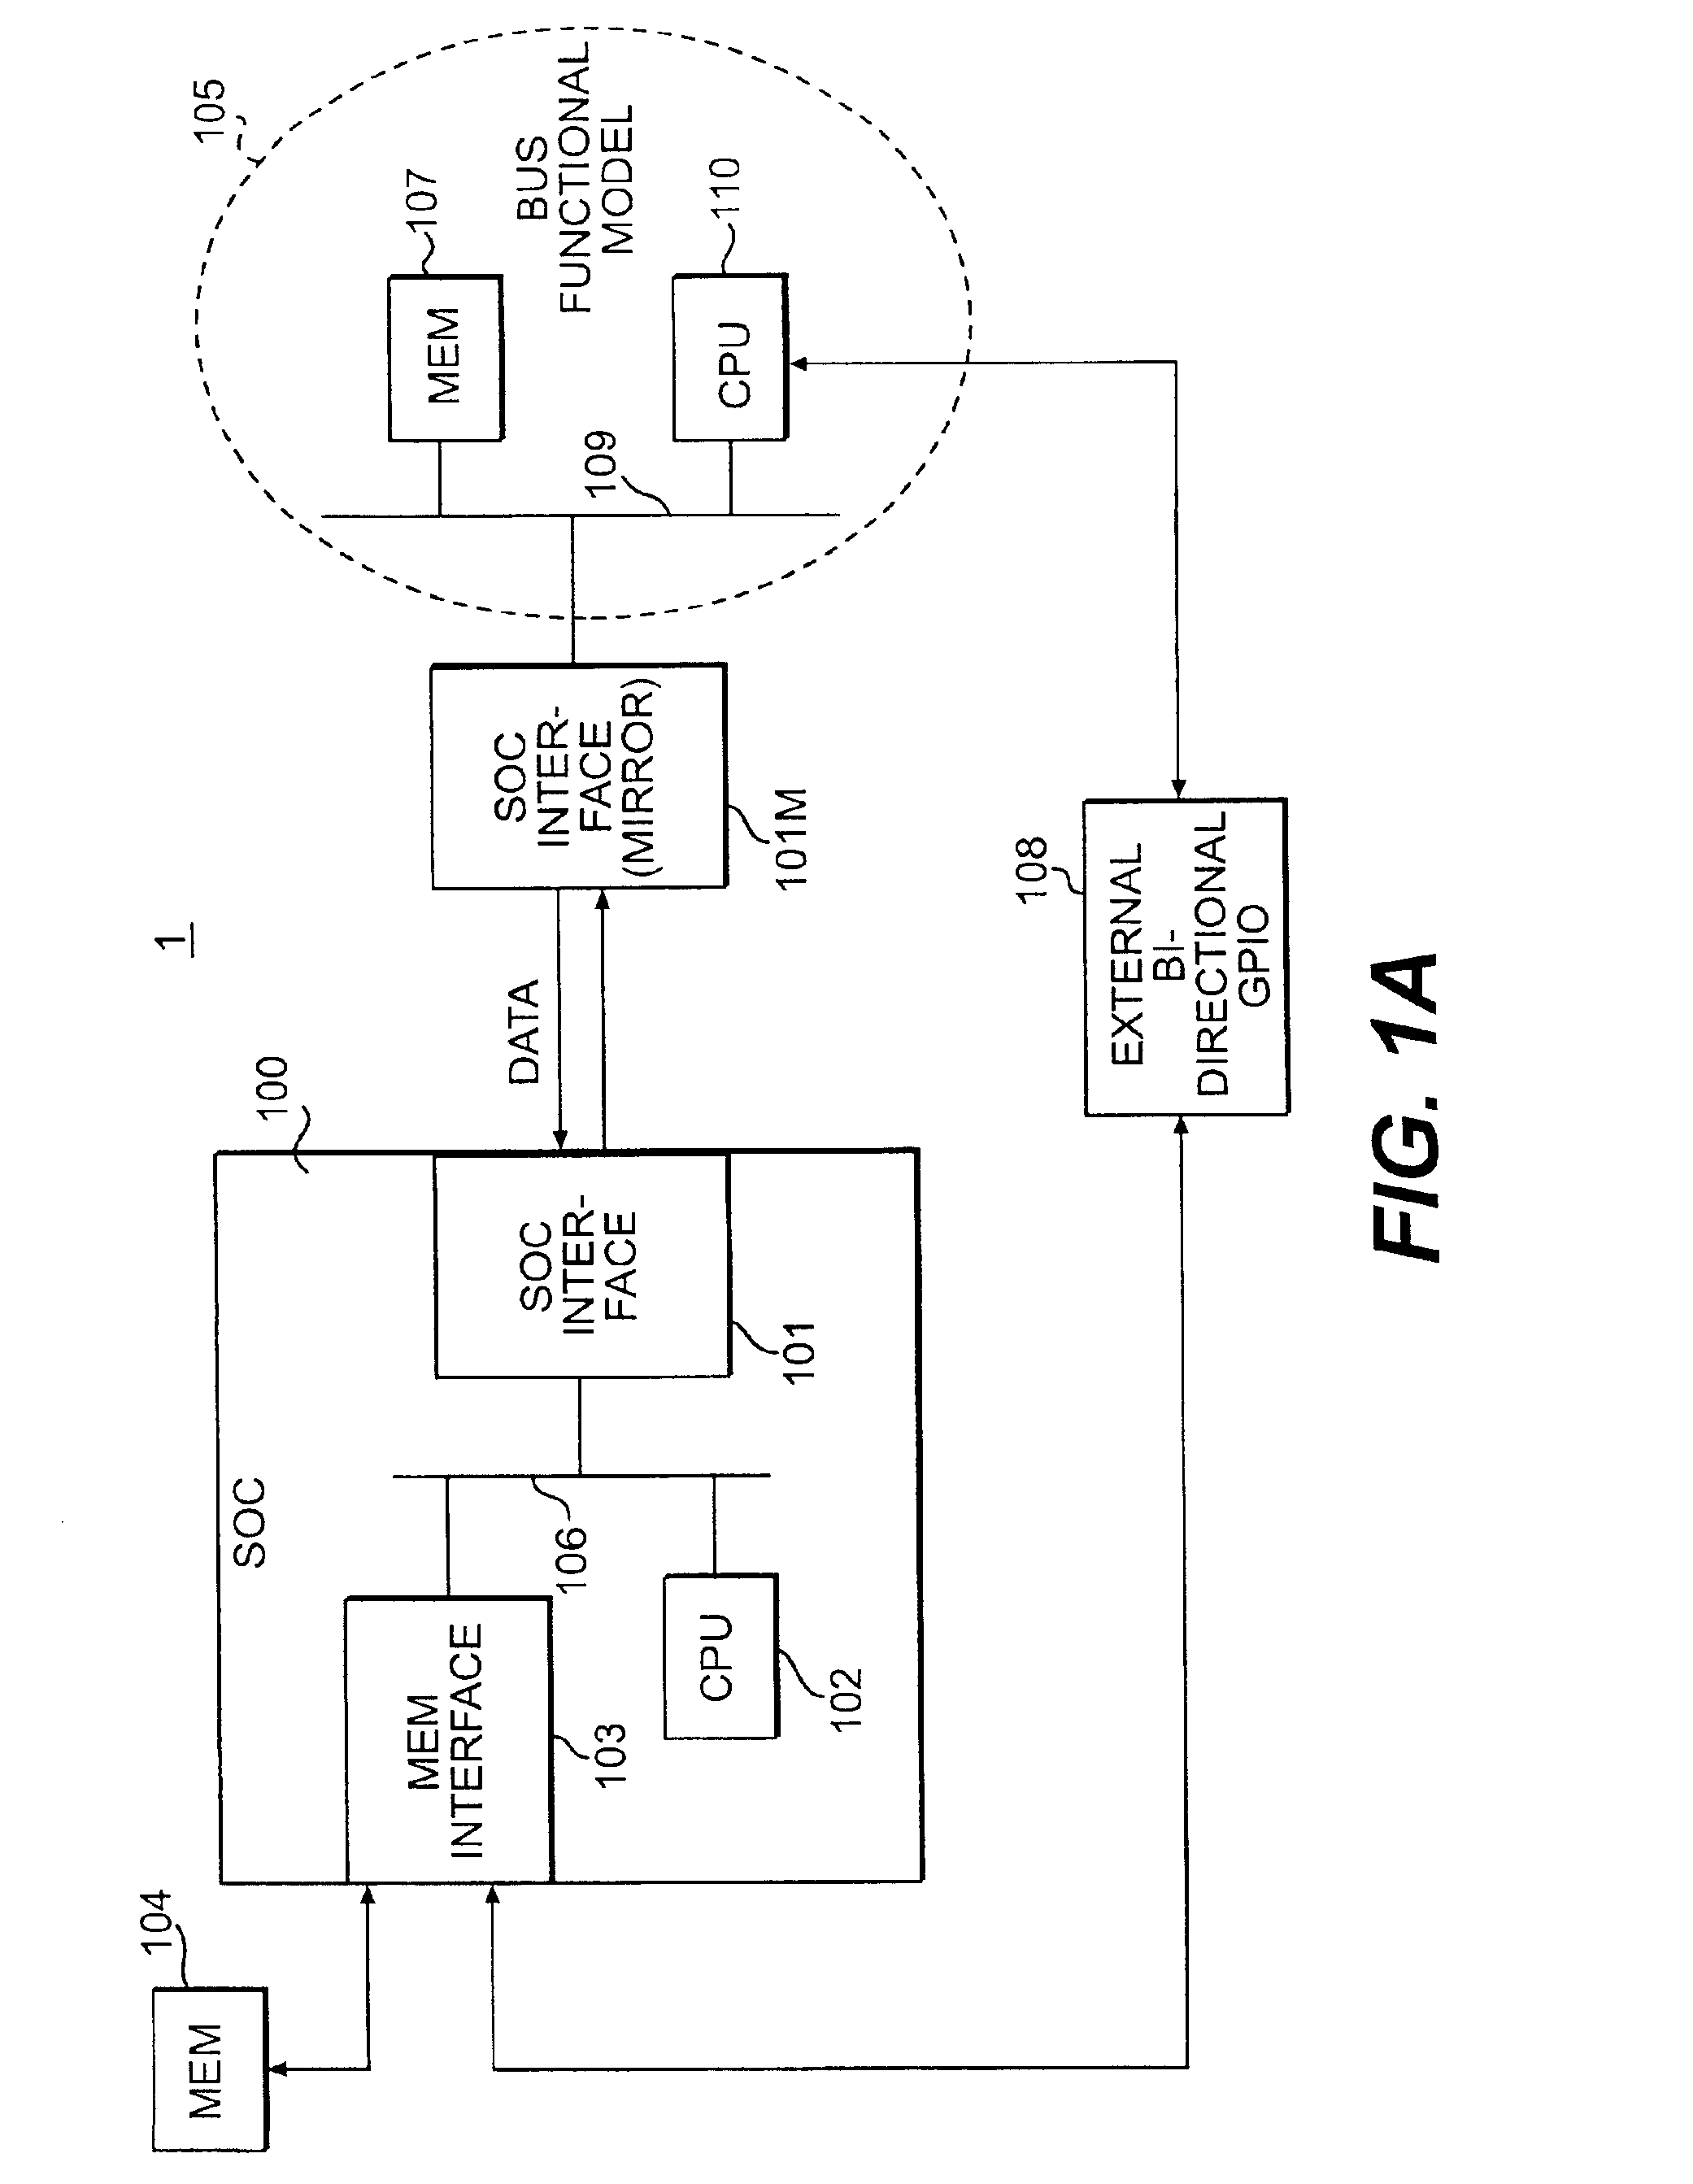 Method and system for logic verification using mirror interface